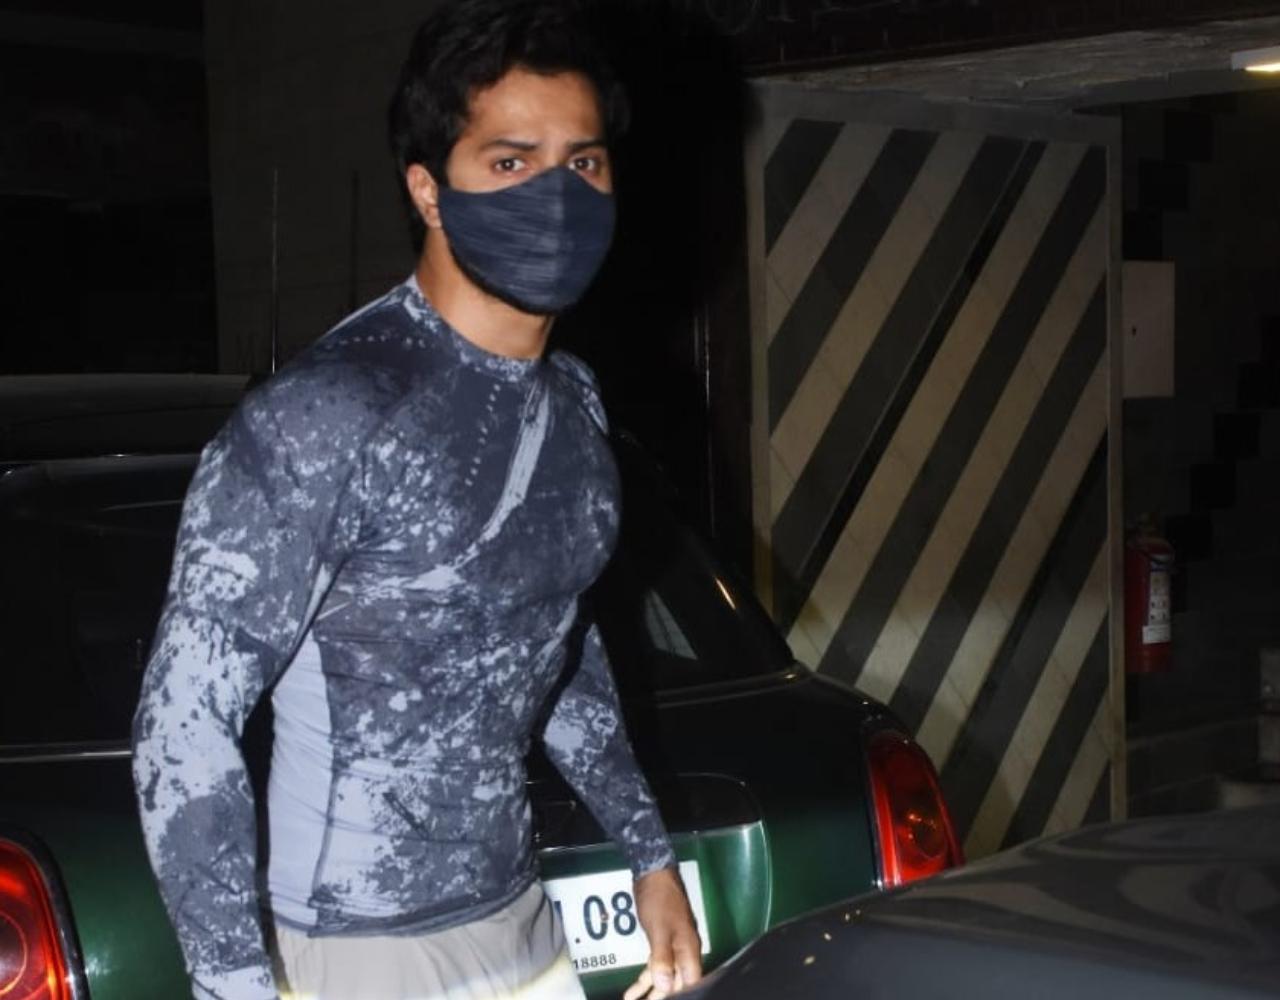 Preparations for Varun Dhawan and Natasha Dalal are in full swing. The actor was recently snapped by the photographers in Juhu, Mumbai. The actor opted for a blue t-shirt and grey pants for the outing. (All pictures: Yogen Shah).